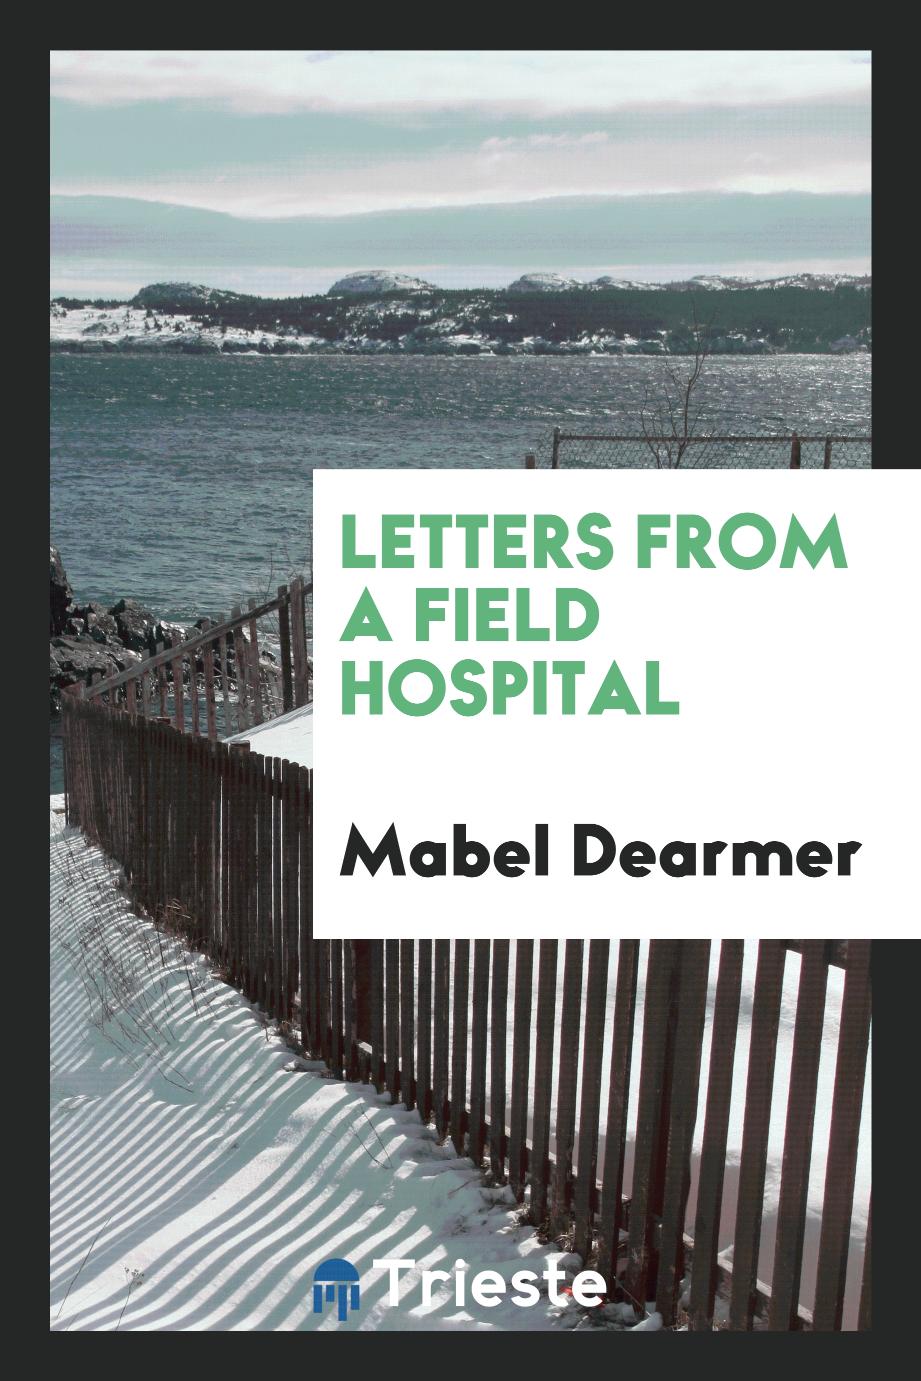 Letters from a field hospital